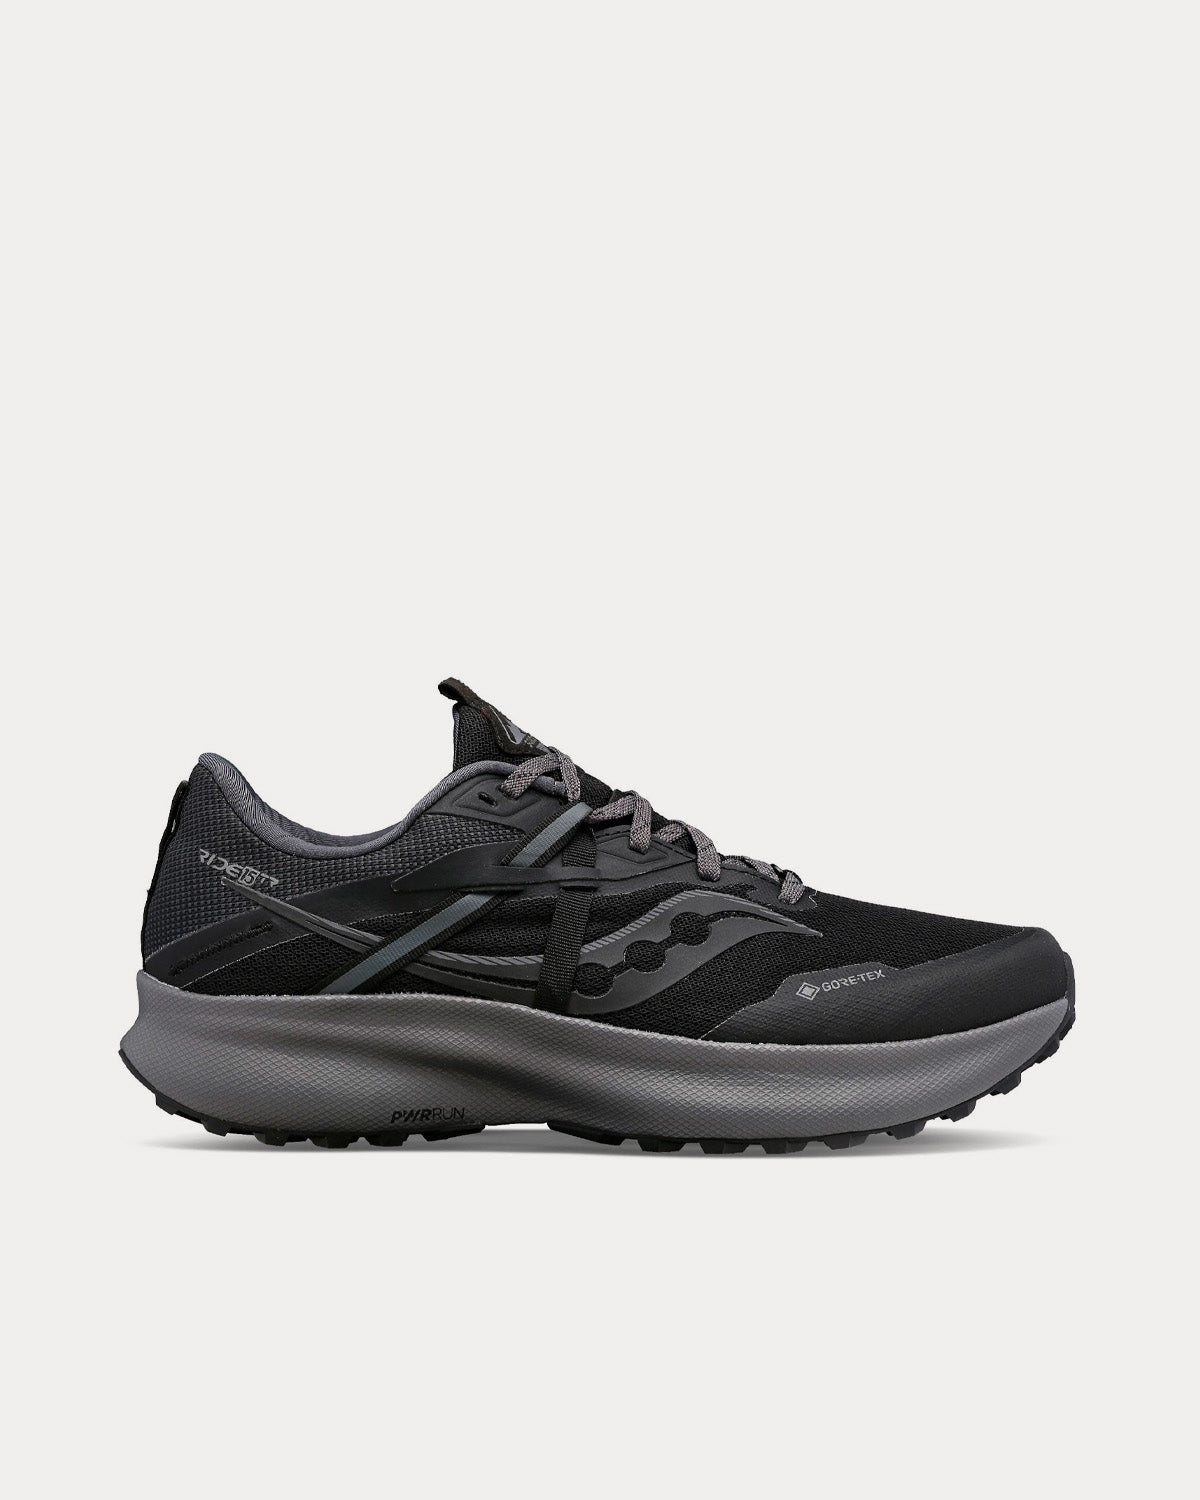 Saucony - Ride 15 TR GTX Black / Charcoal Running Shoes